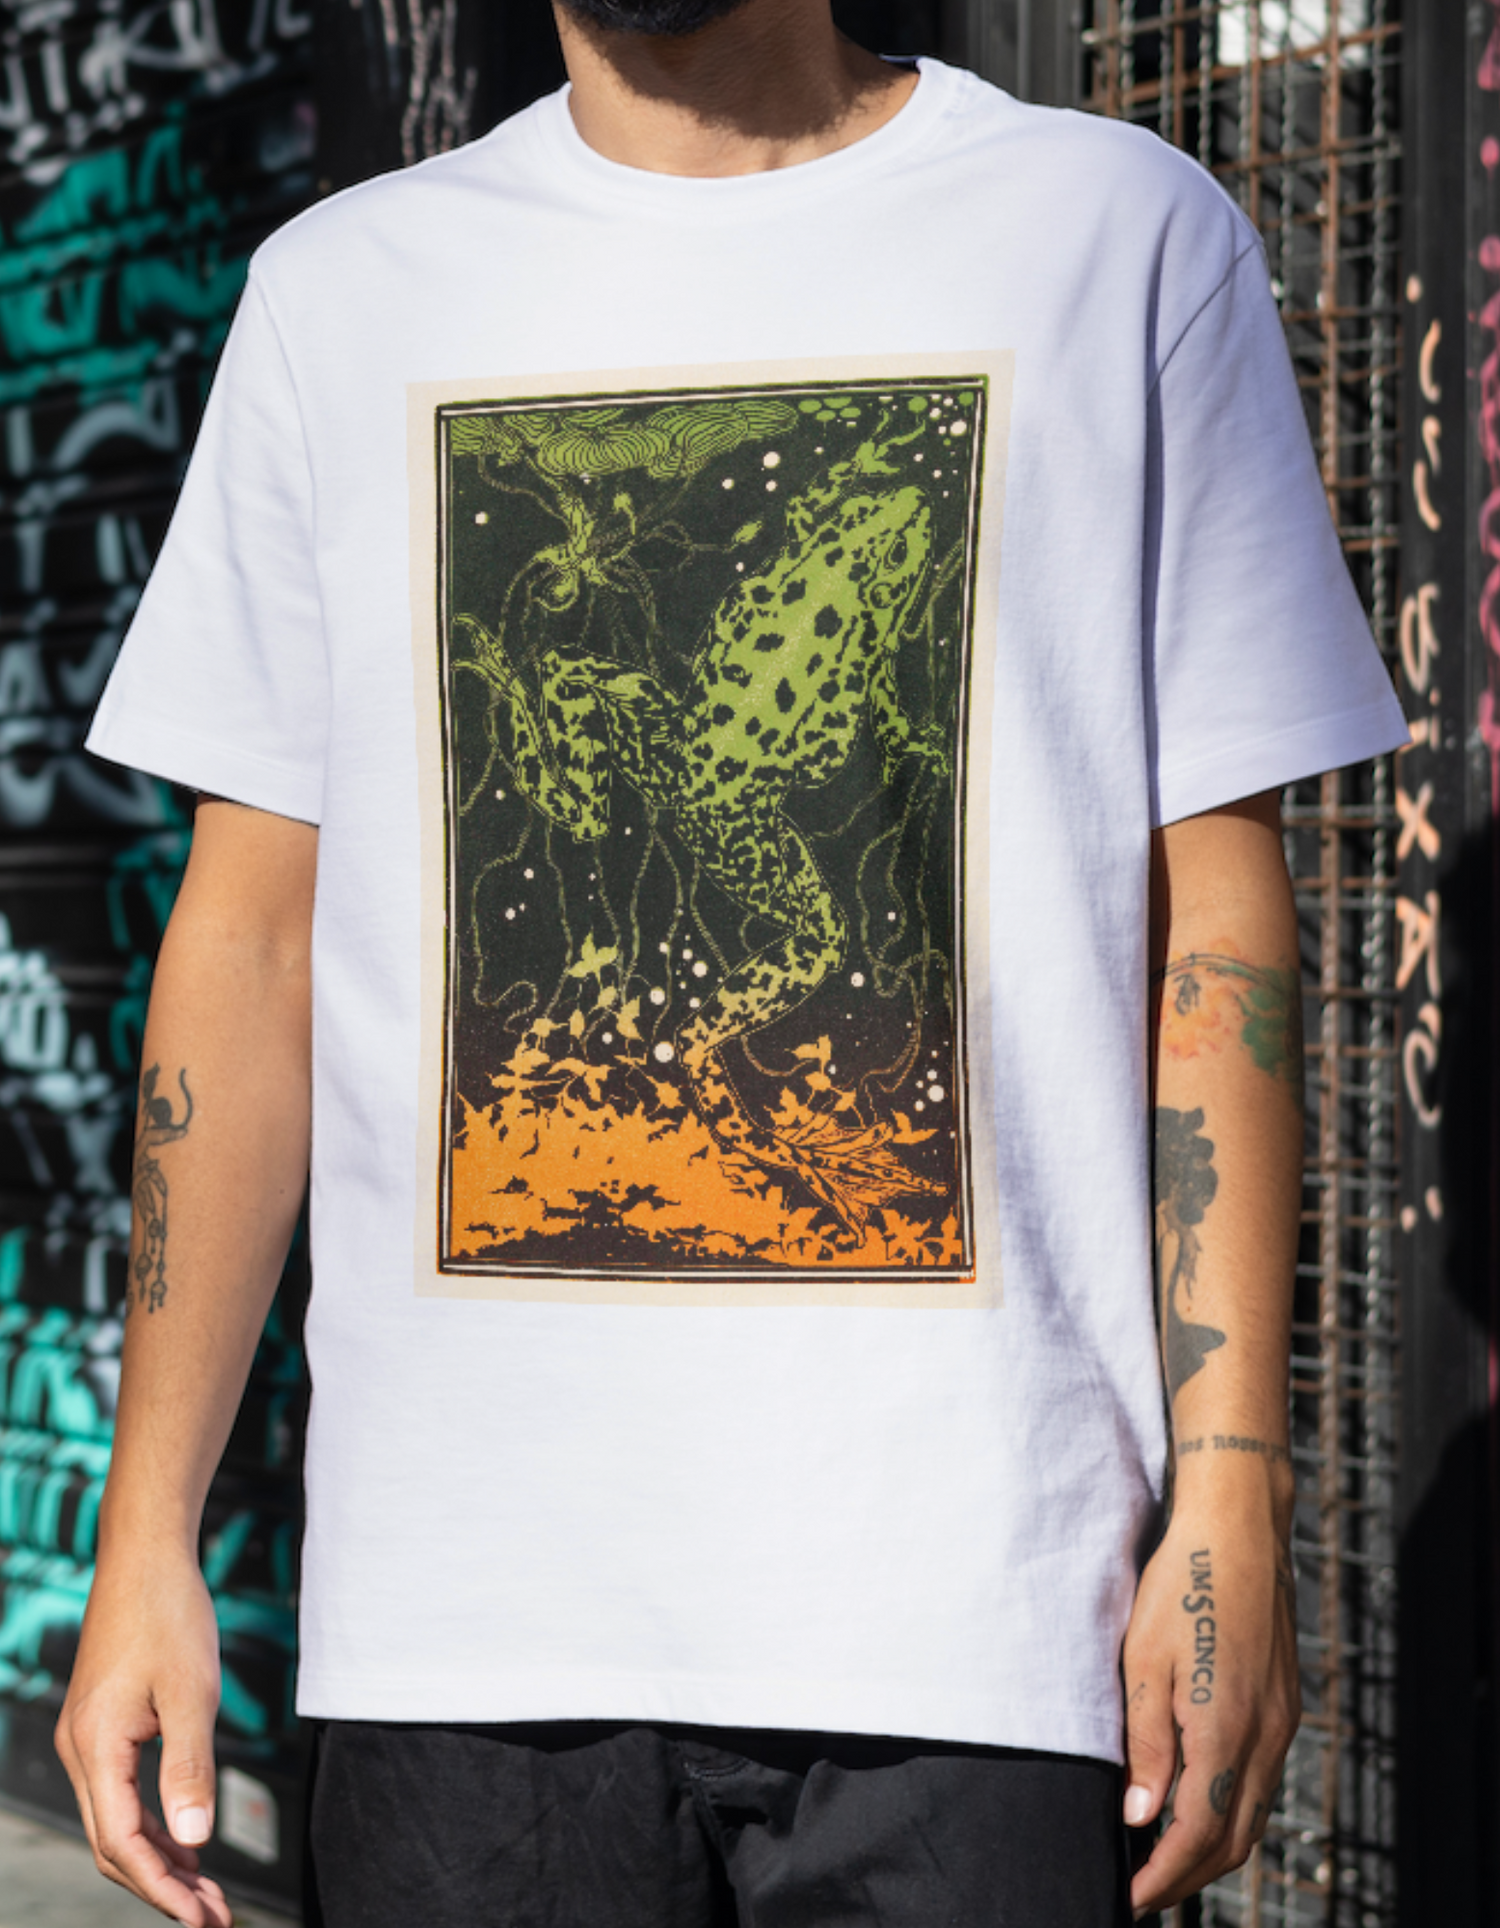 High-quality graphic tees and t-shirts printed in Australia, shipped worldwide. Artistic designs and unique casual wear for men and women. Buy online with Arty Threads Australia.